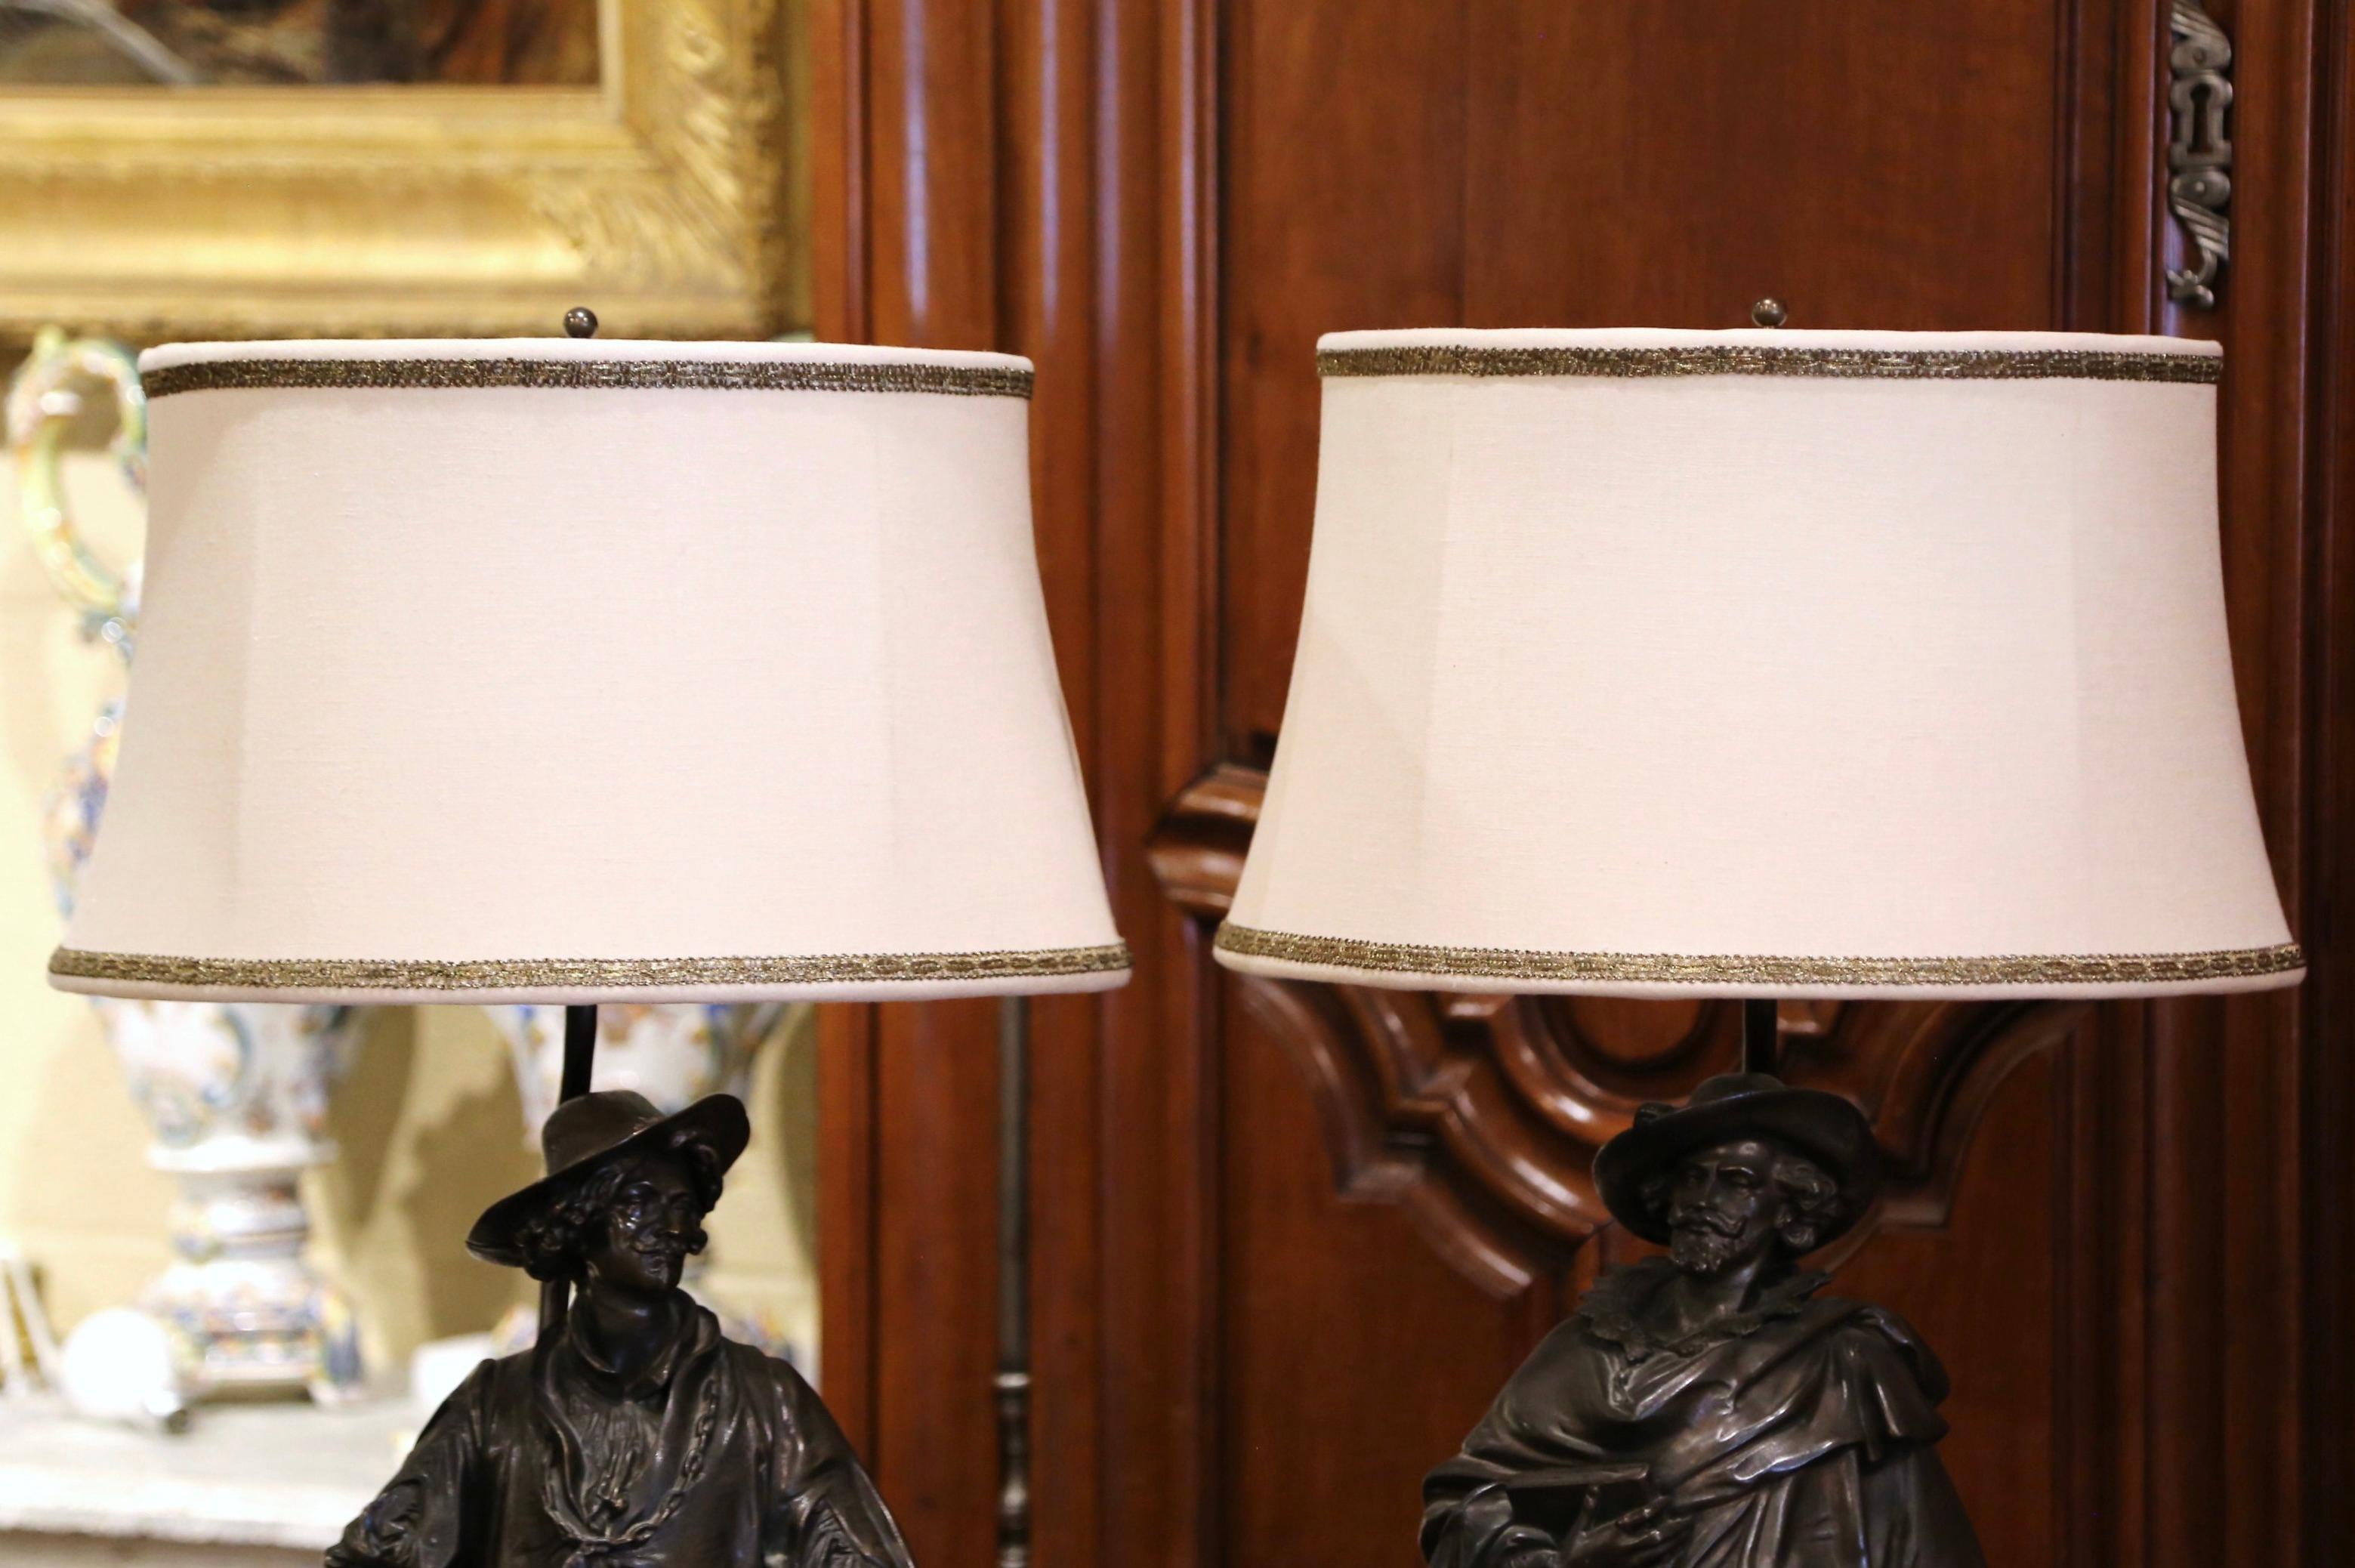 Pair of 19th Century French Spelter Renaissance Figures Made into Table Lamps 1